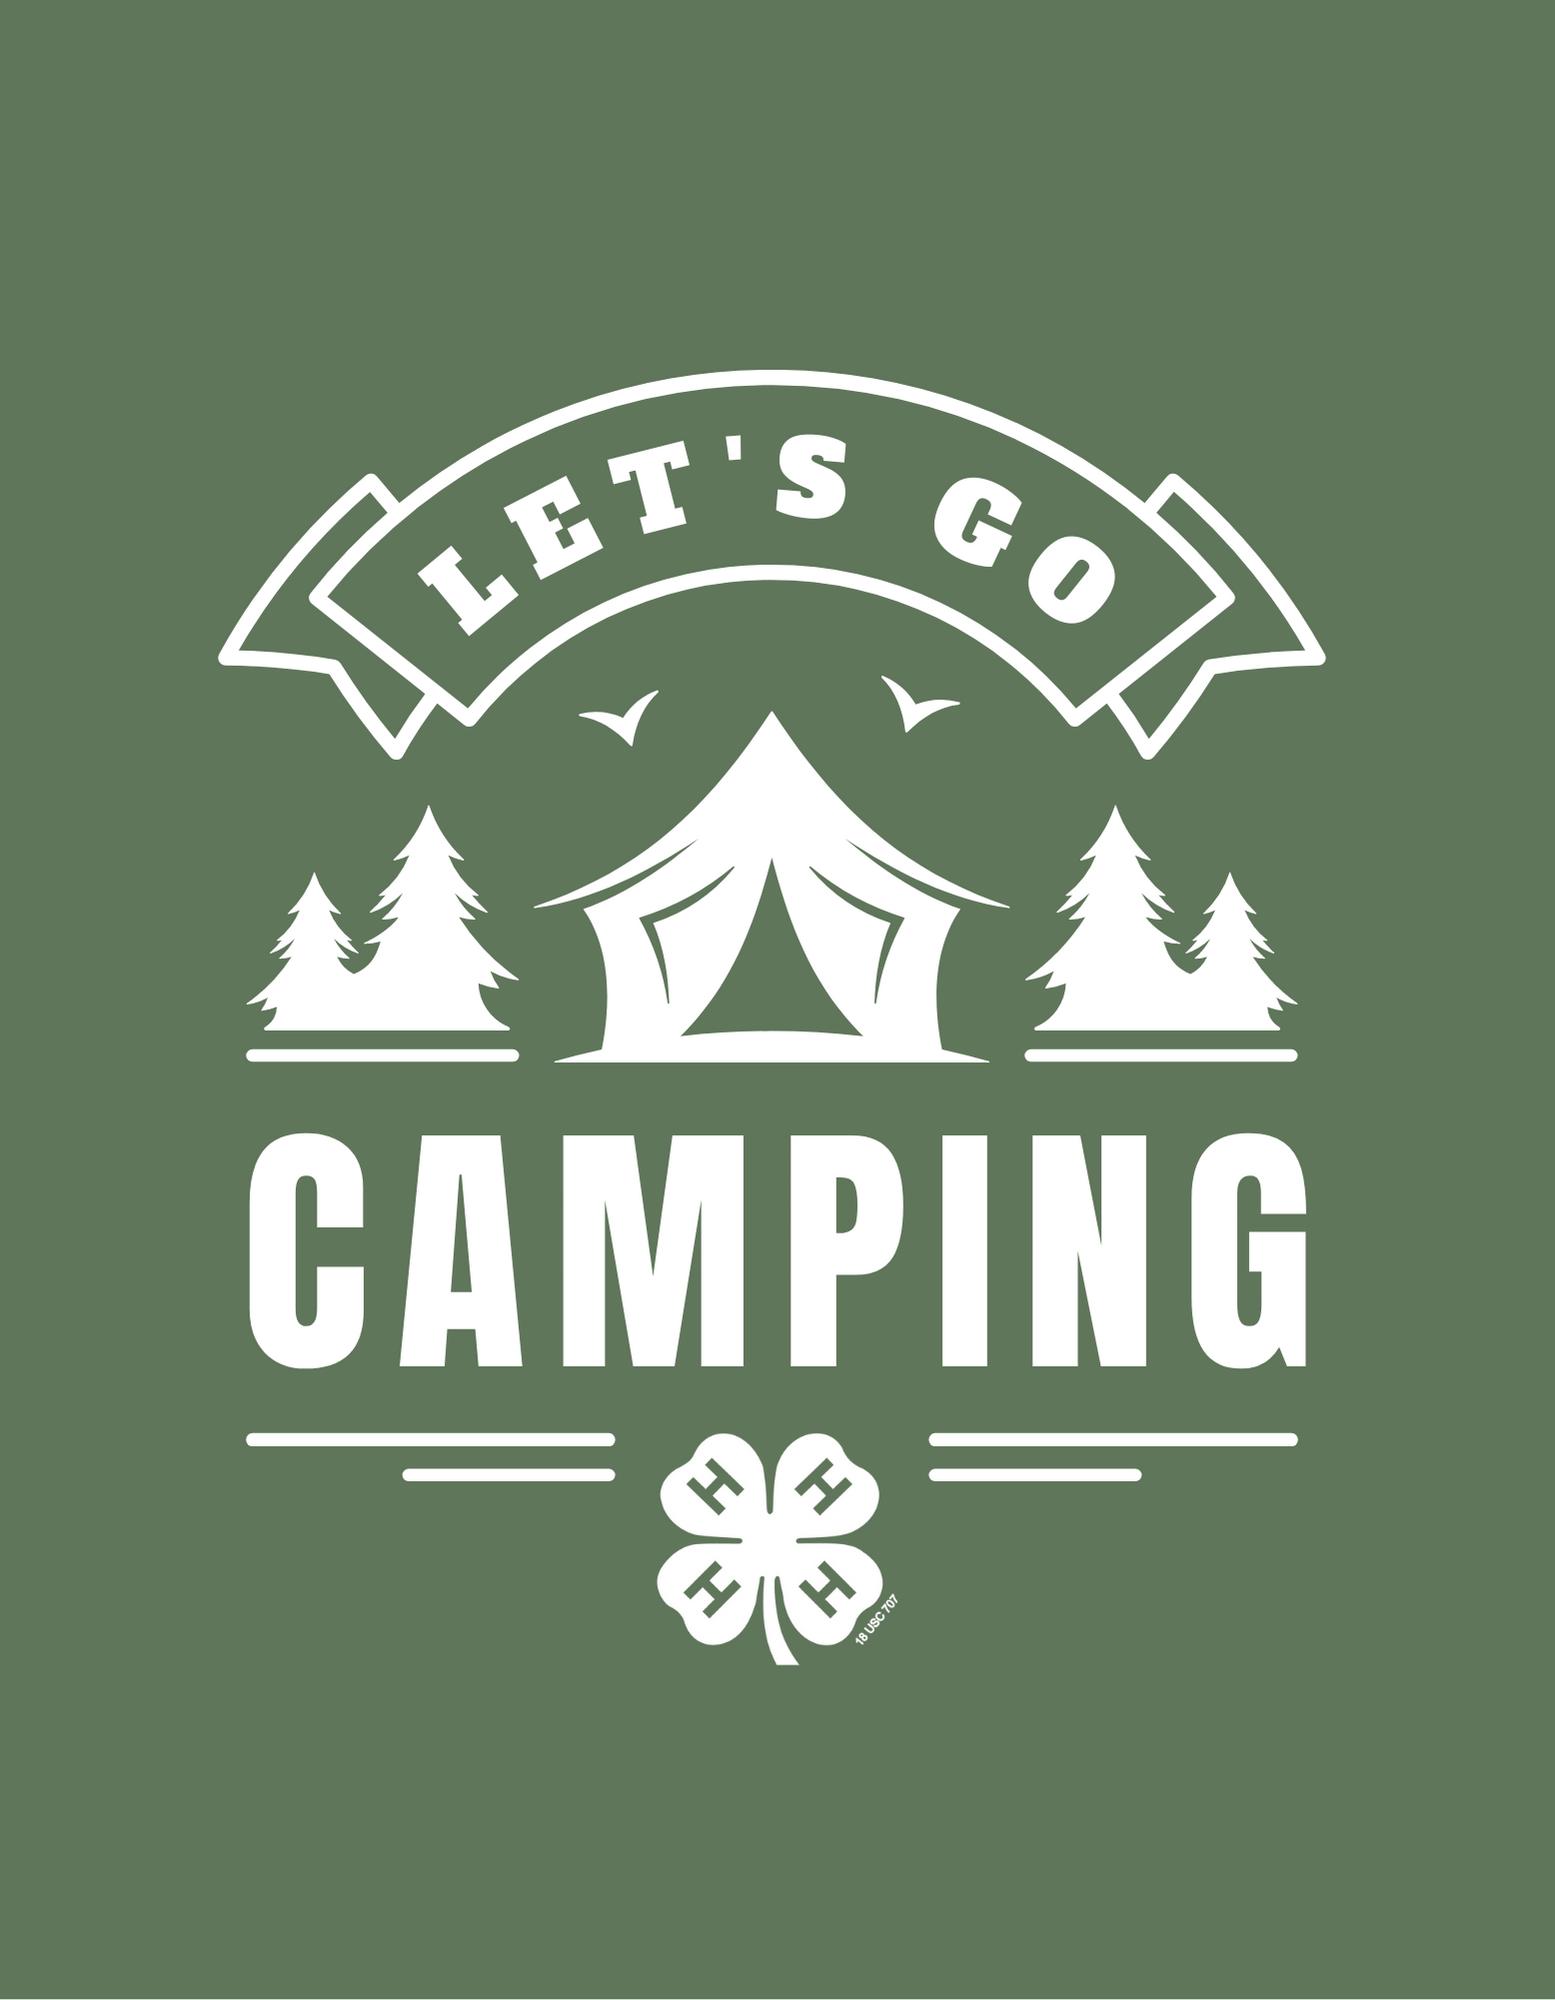 draft of "Let's Go Camping" tee shirt design with nature scene